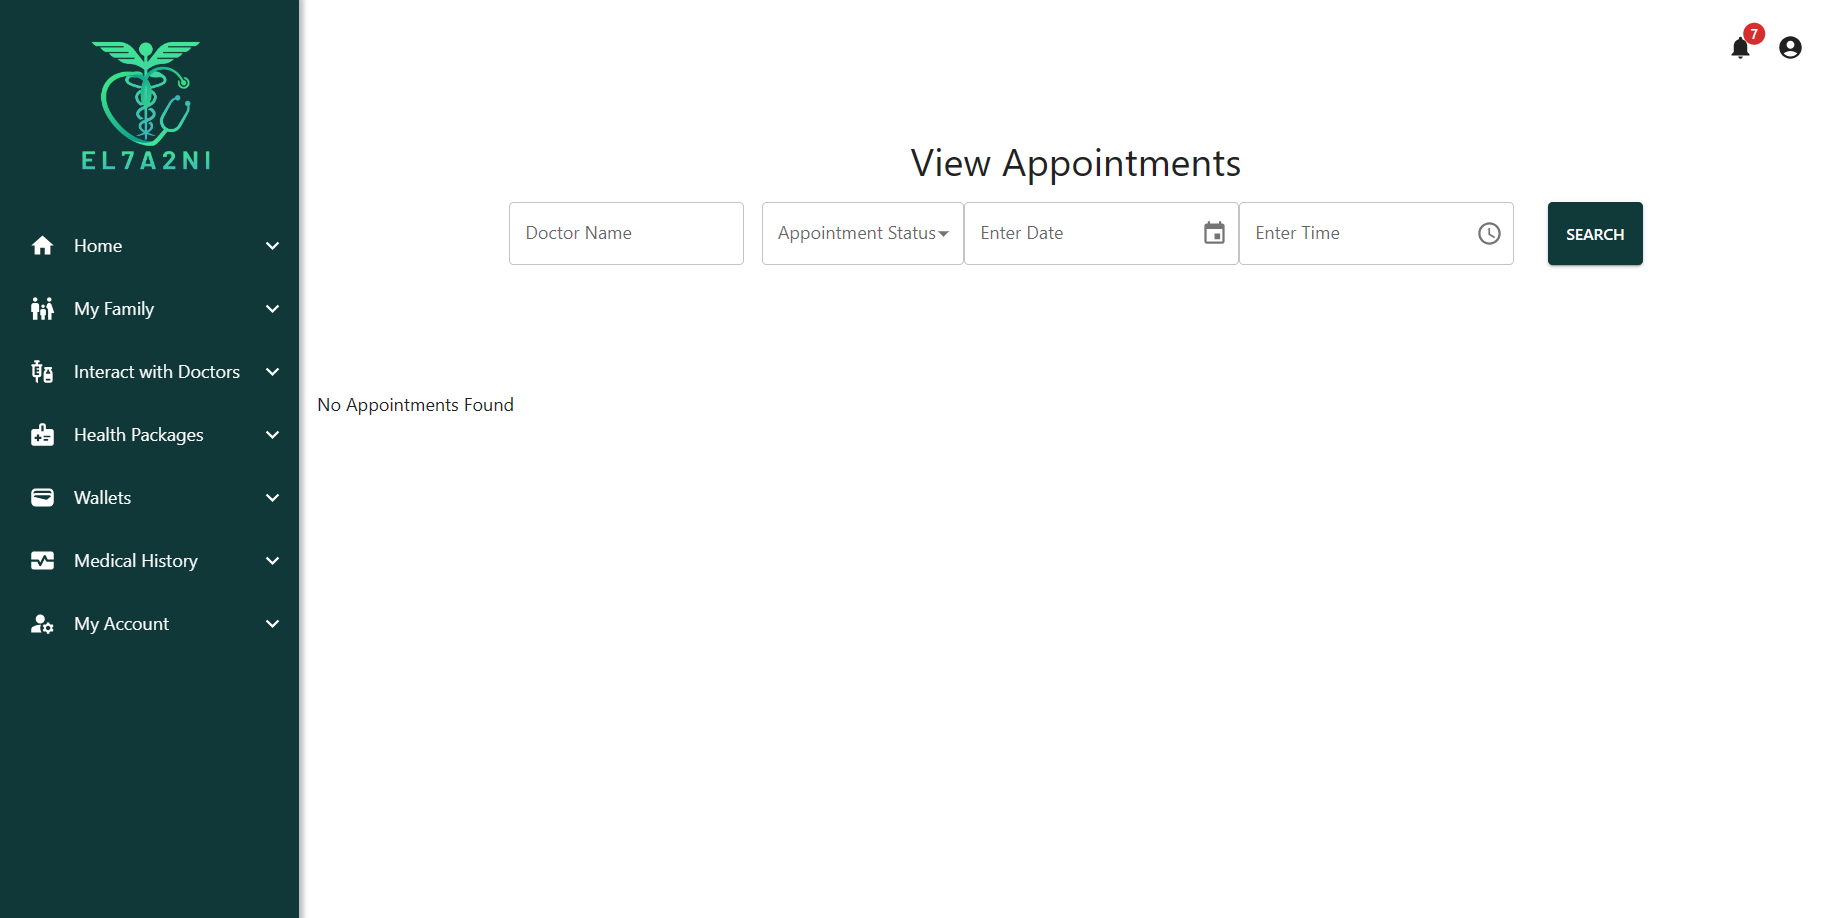 View the appointment